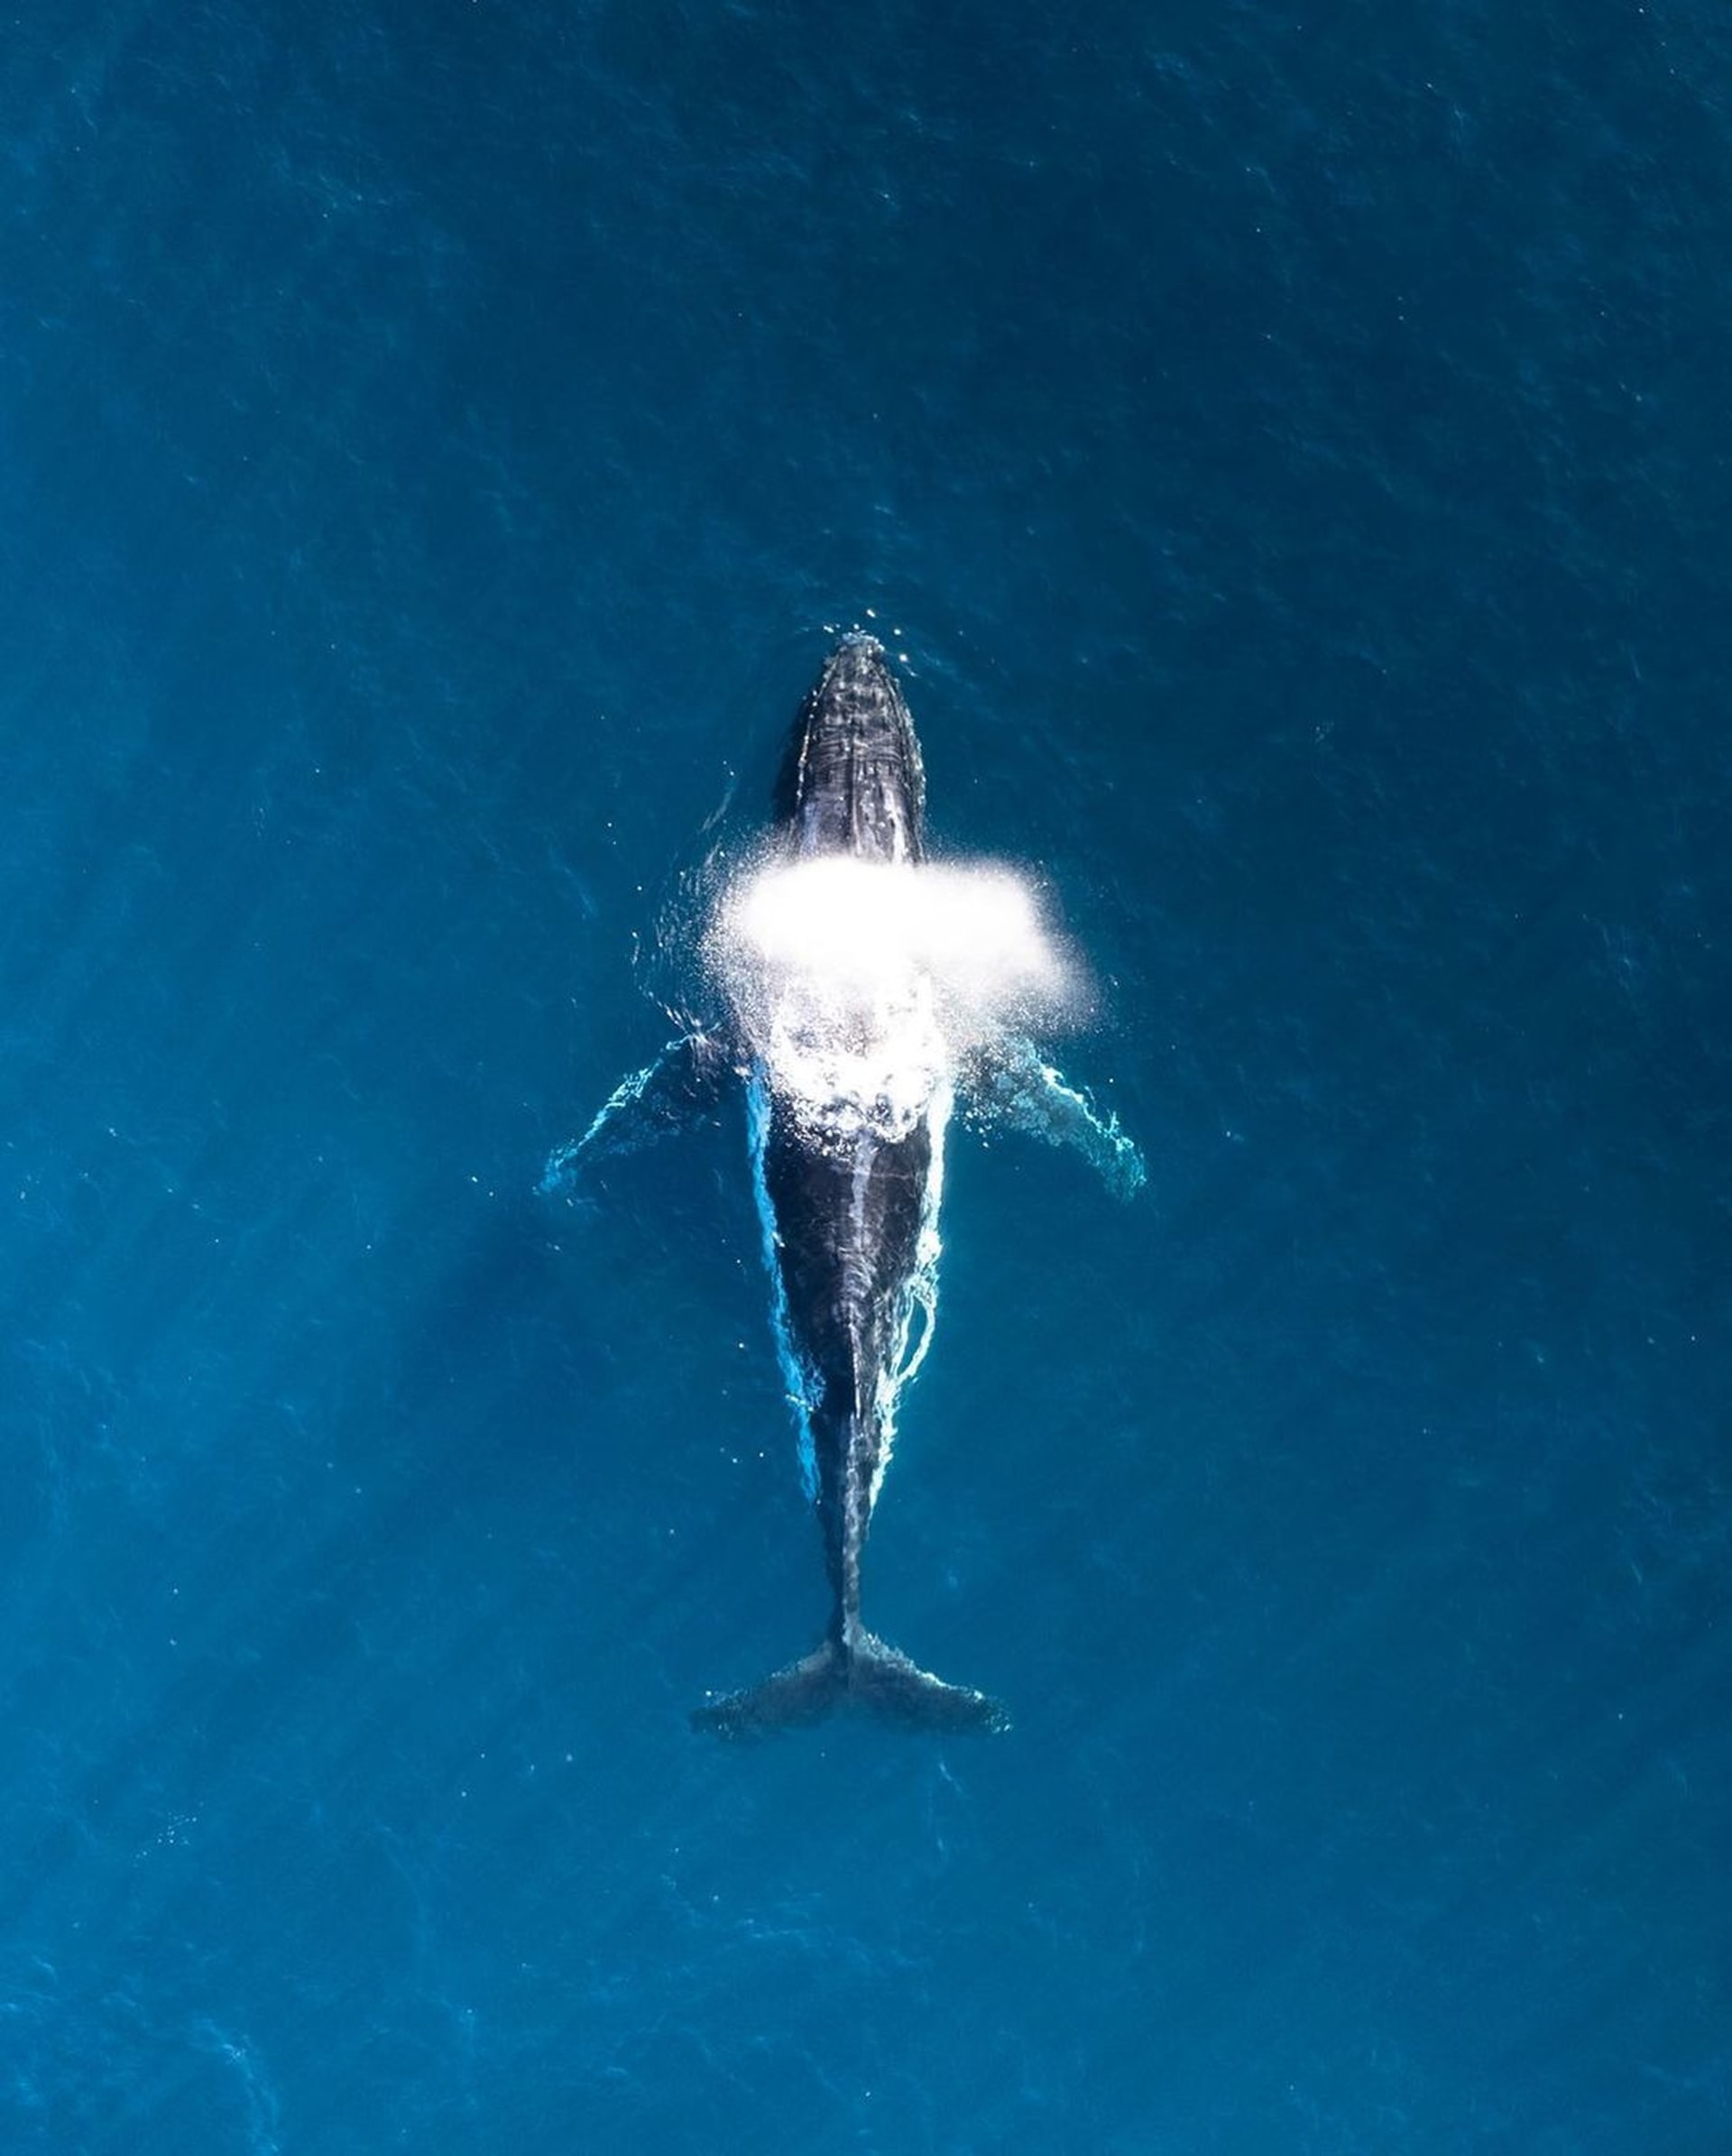 Most experts agree that the blue whale is the largest animal that has ever lived on Earth… they even say its the loudest. The dwarf sperm whale is only 8 feet long and is the smallest whale. The average whale can be up to 105 feet long.